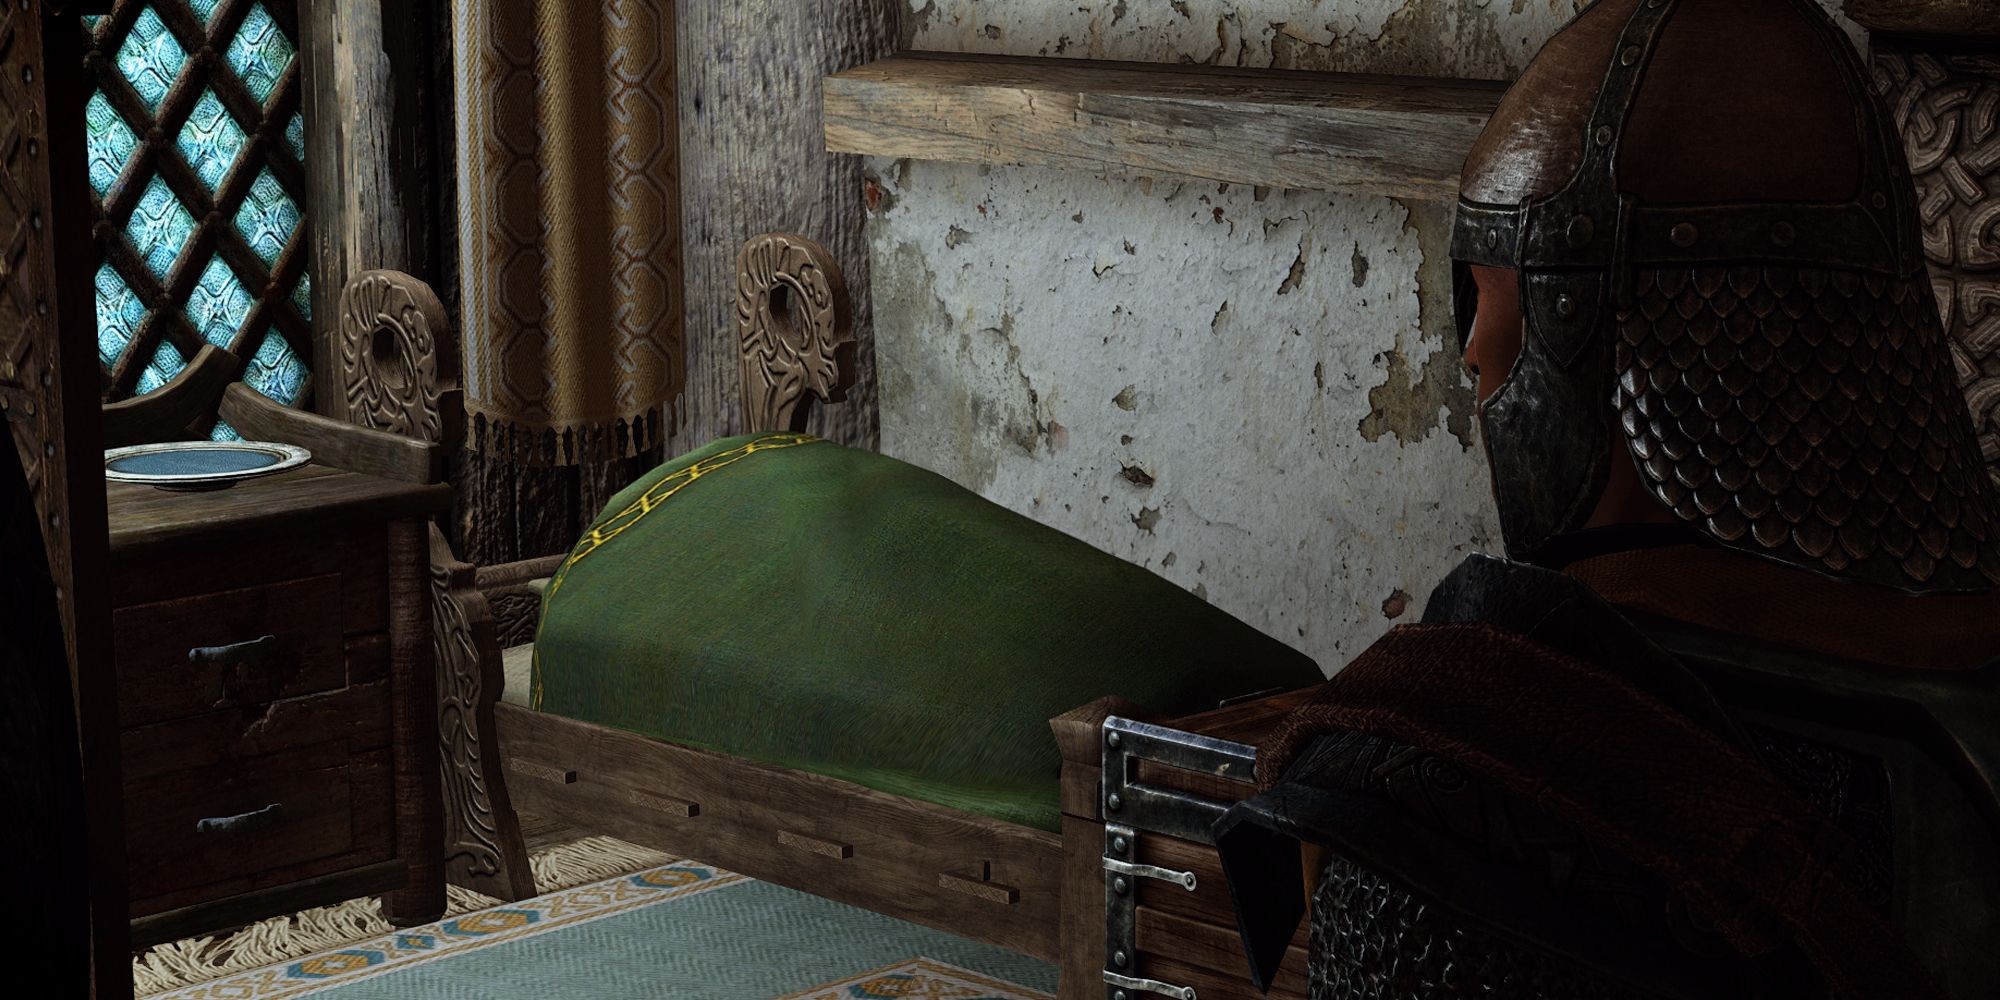 a bed in skyrim which is bulging so it looks like someone is under the covers